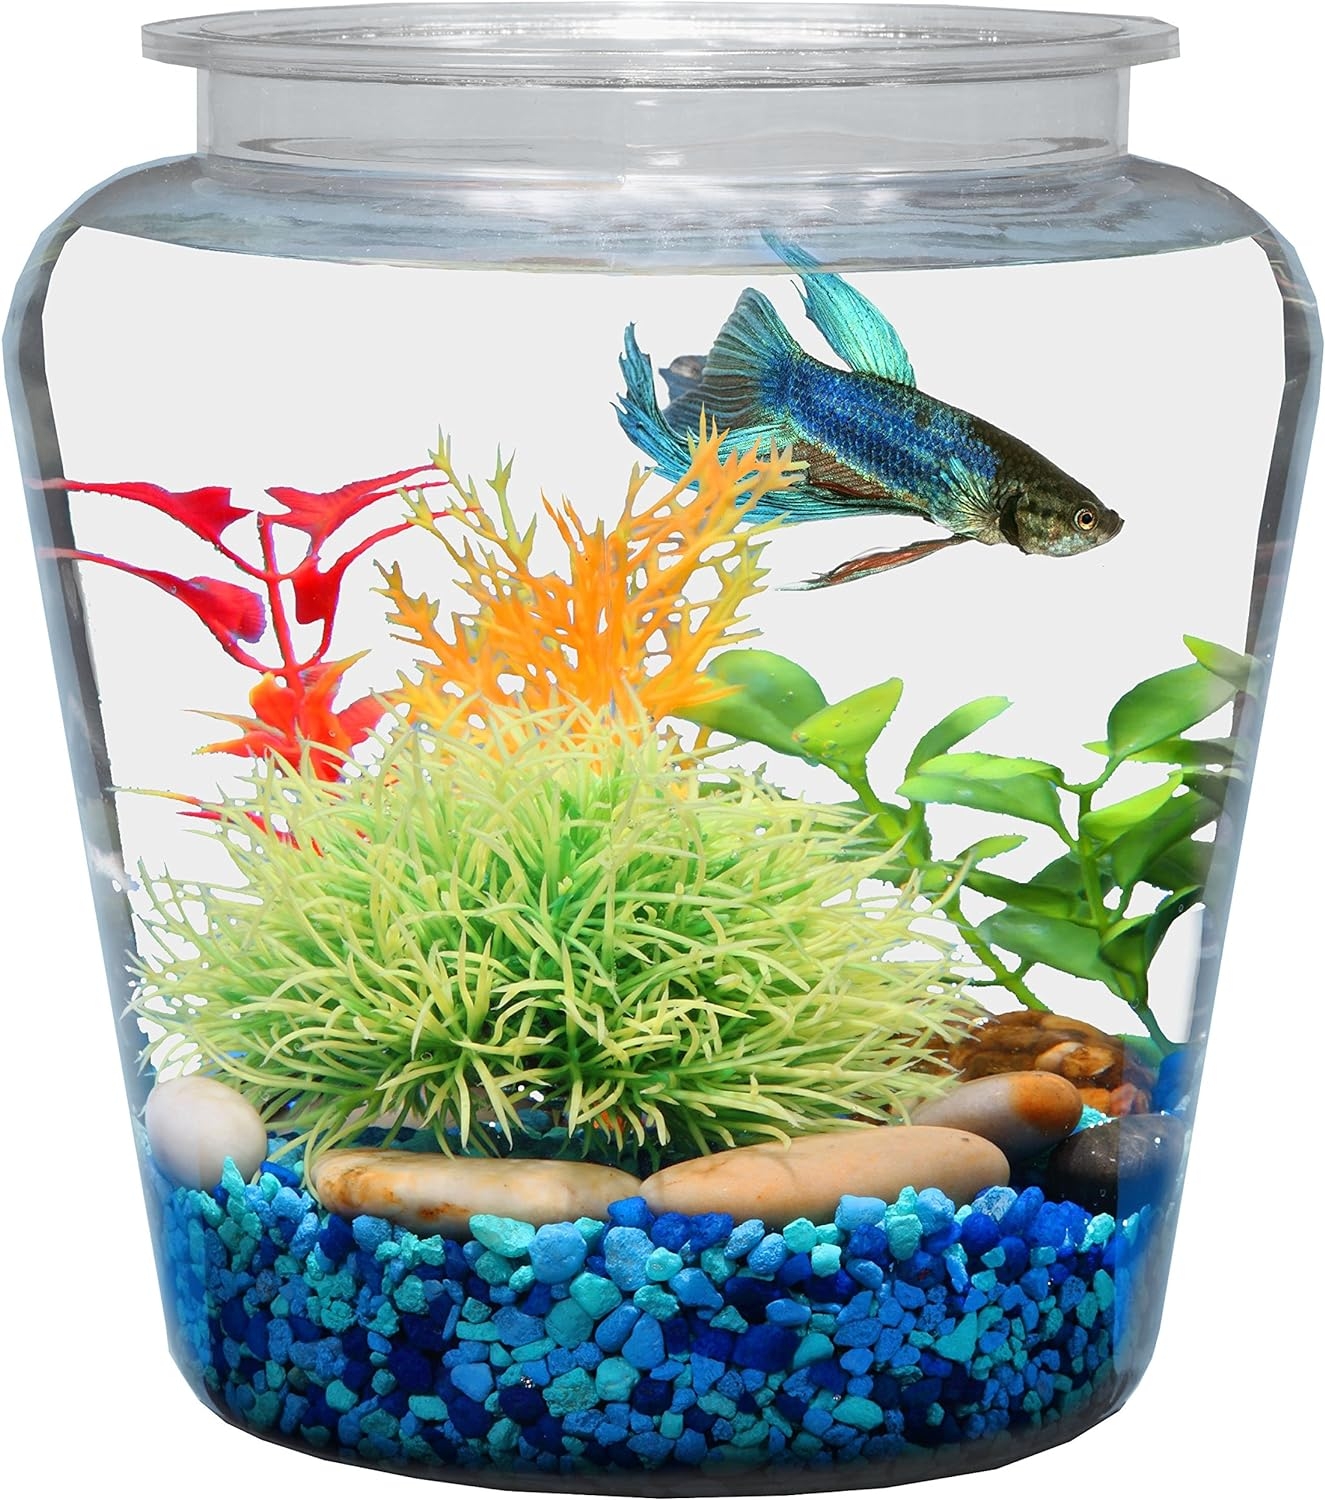 Koller Products 1-Gallon Fish Bowl, Shatterproof Plastic with Crystal-Clear Clarity, 7.25 DIA x 8 H Inches, Model Number: 49146000130